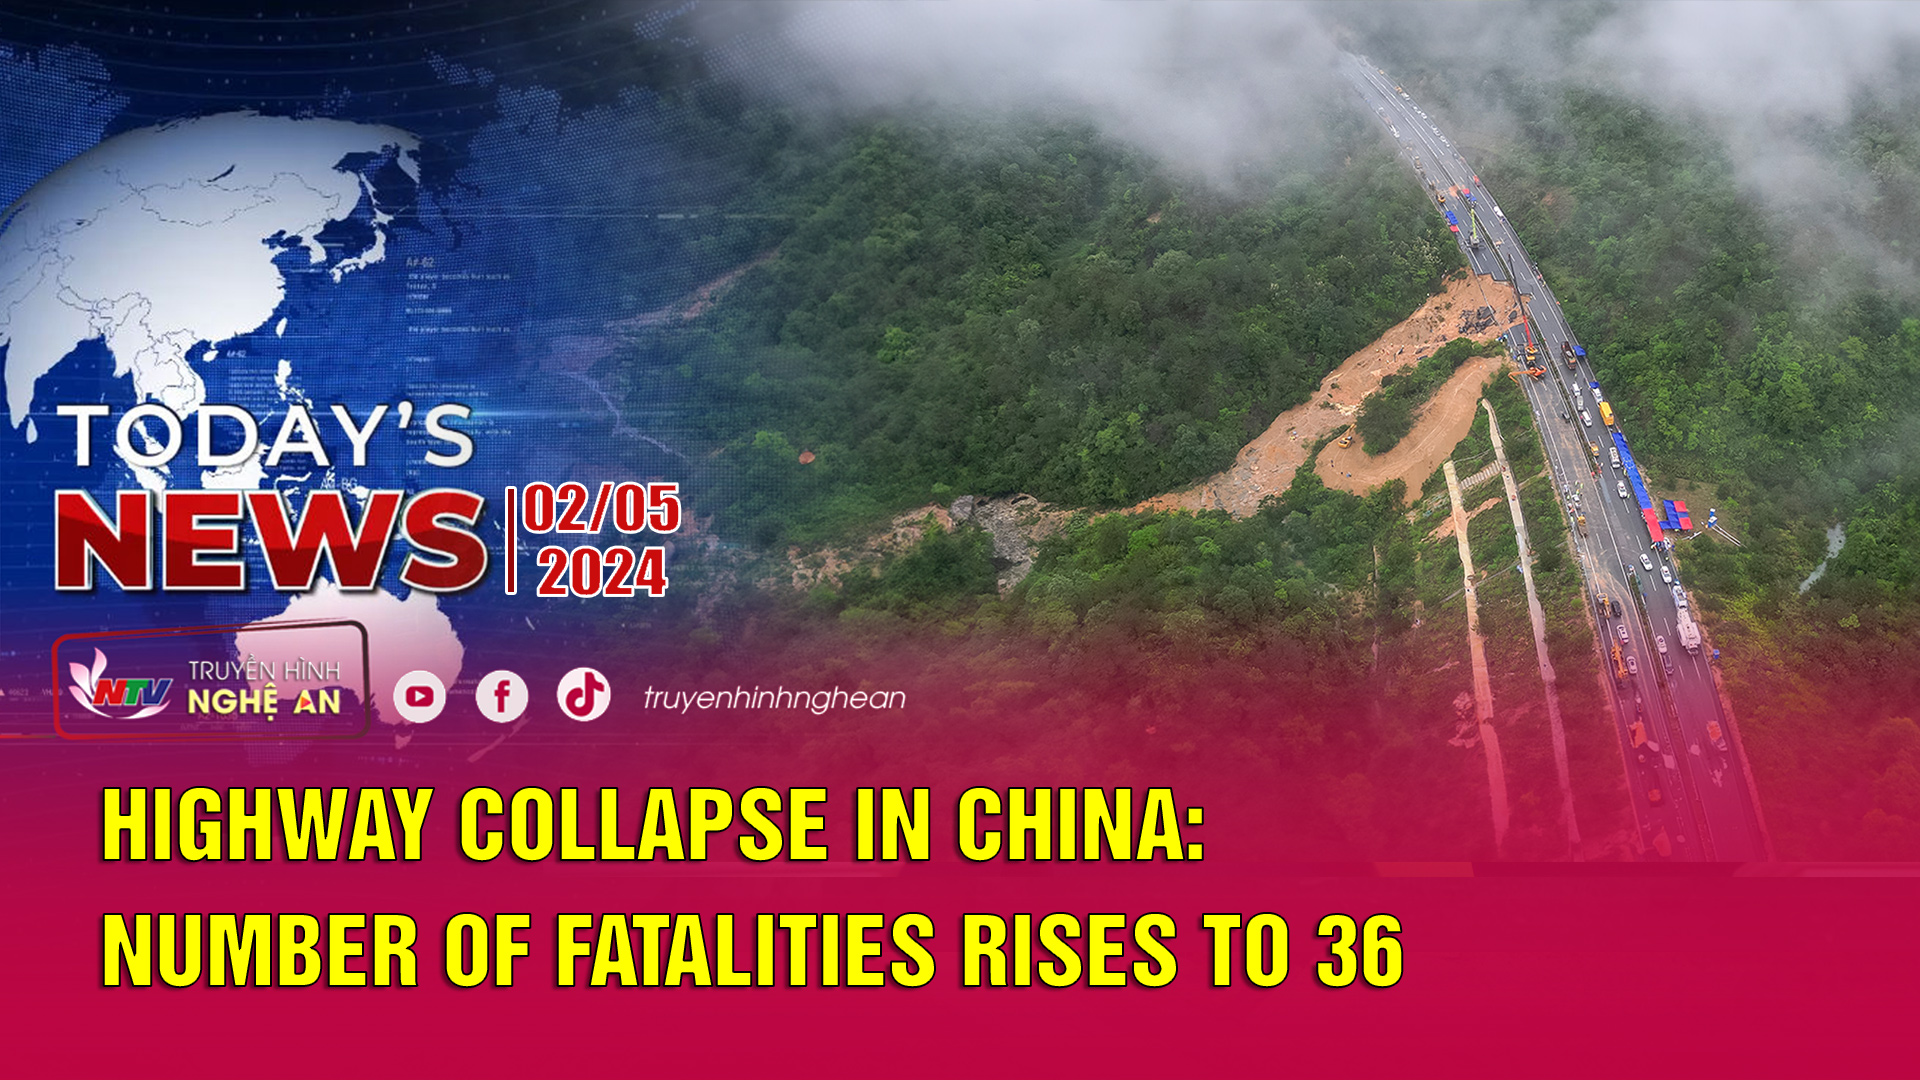 Today's News 02/05/2024: Highway collapse in China: Number of fatalities Rises to 36